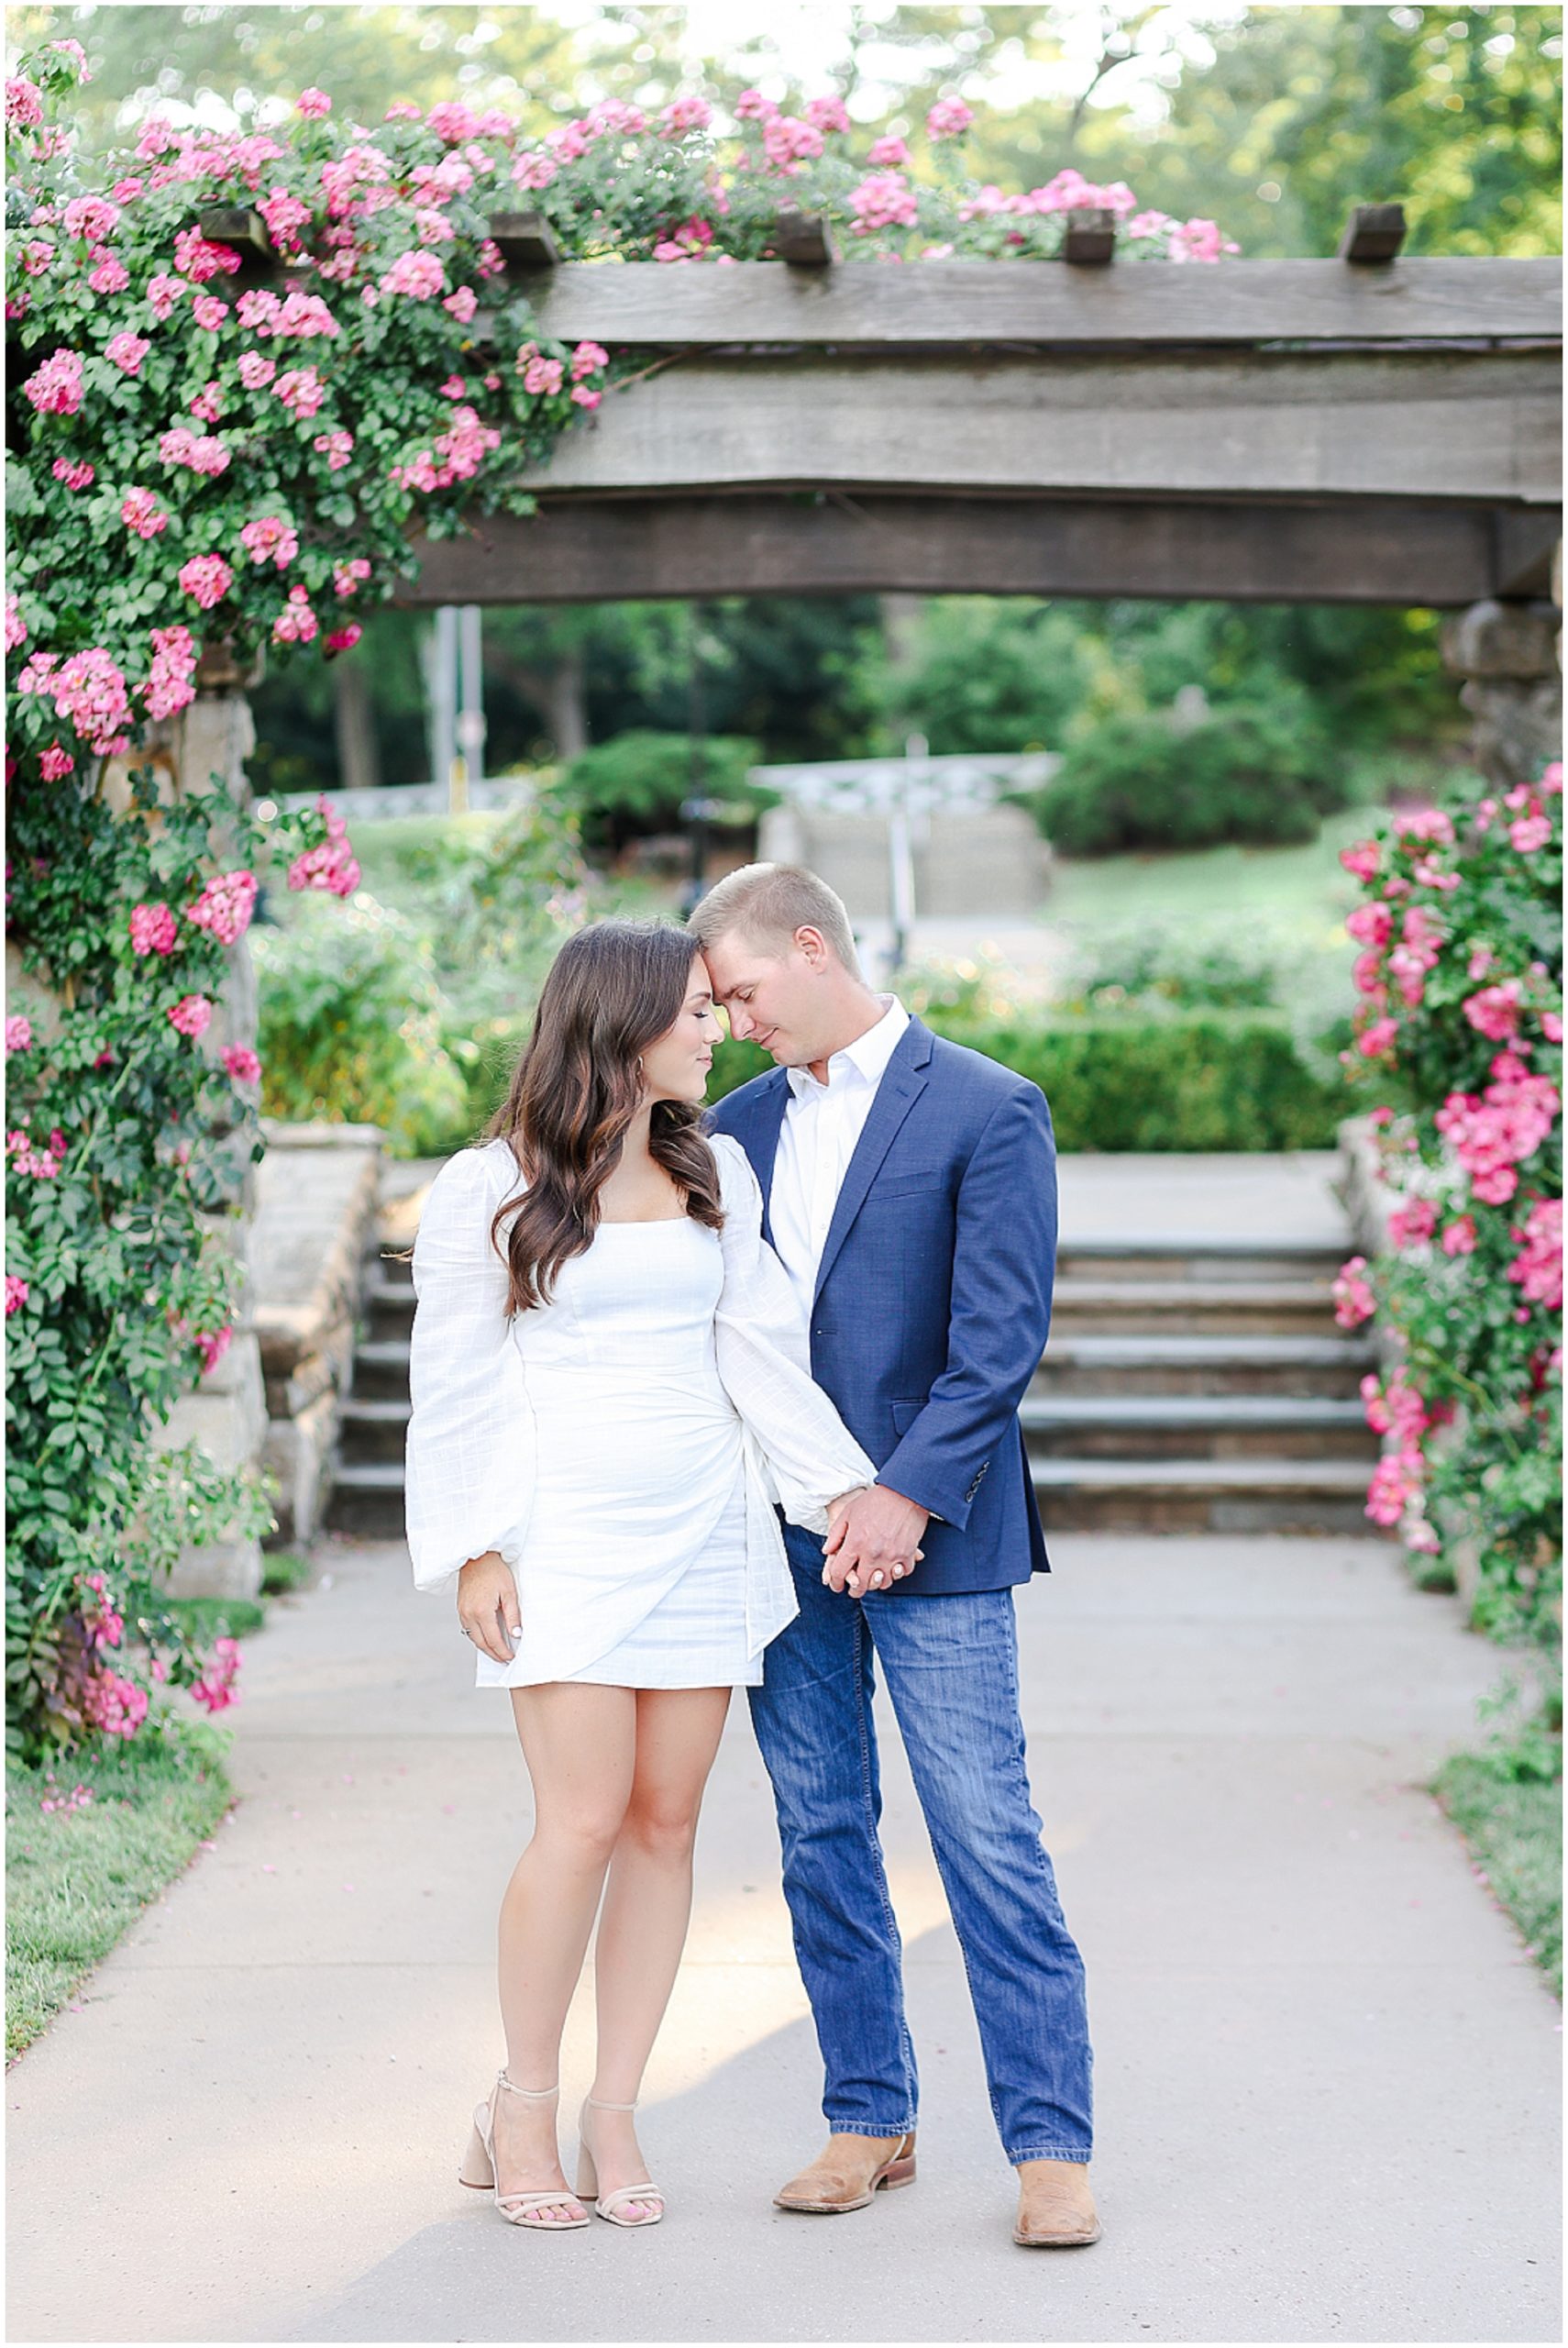 gorgeous engagement session - Kansas City Engagement & Wedding Photographer - Rachel & Kyle's Engagement Portraits by Mariam Saifan Photography - Loose Park photos - What to Wear for Your Engagement Portraits - Style Guide - Loose Park Engagement Session - Where to Take Photos in Kansas City